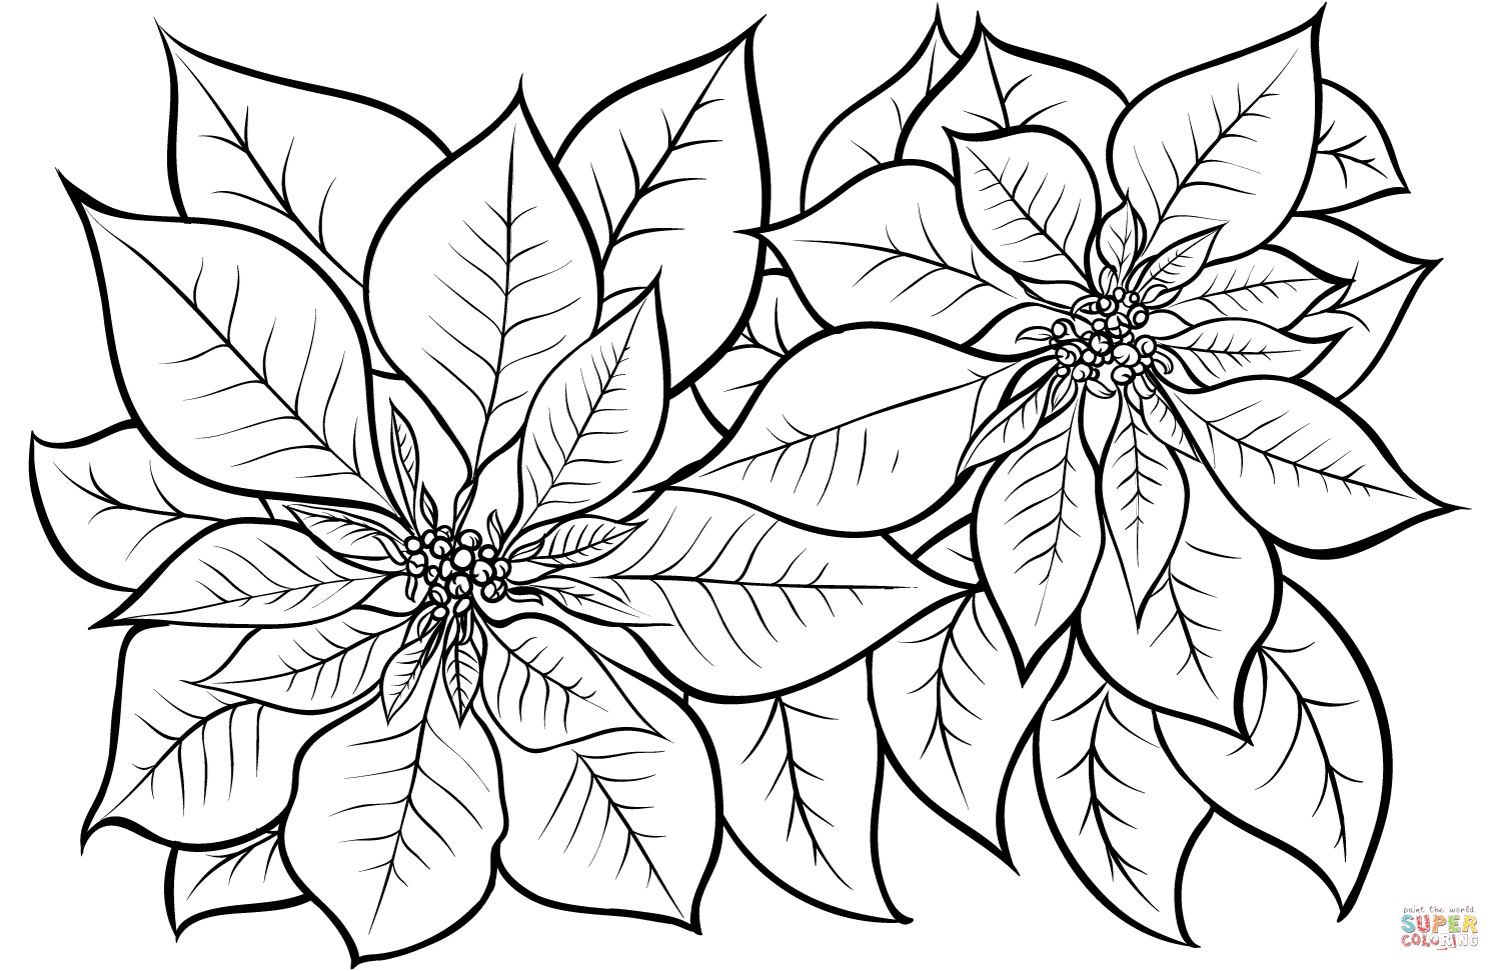 Poinsettia coloring page free printable coloring pages